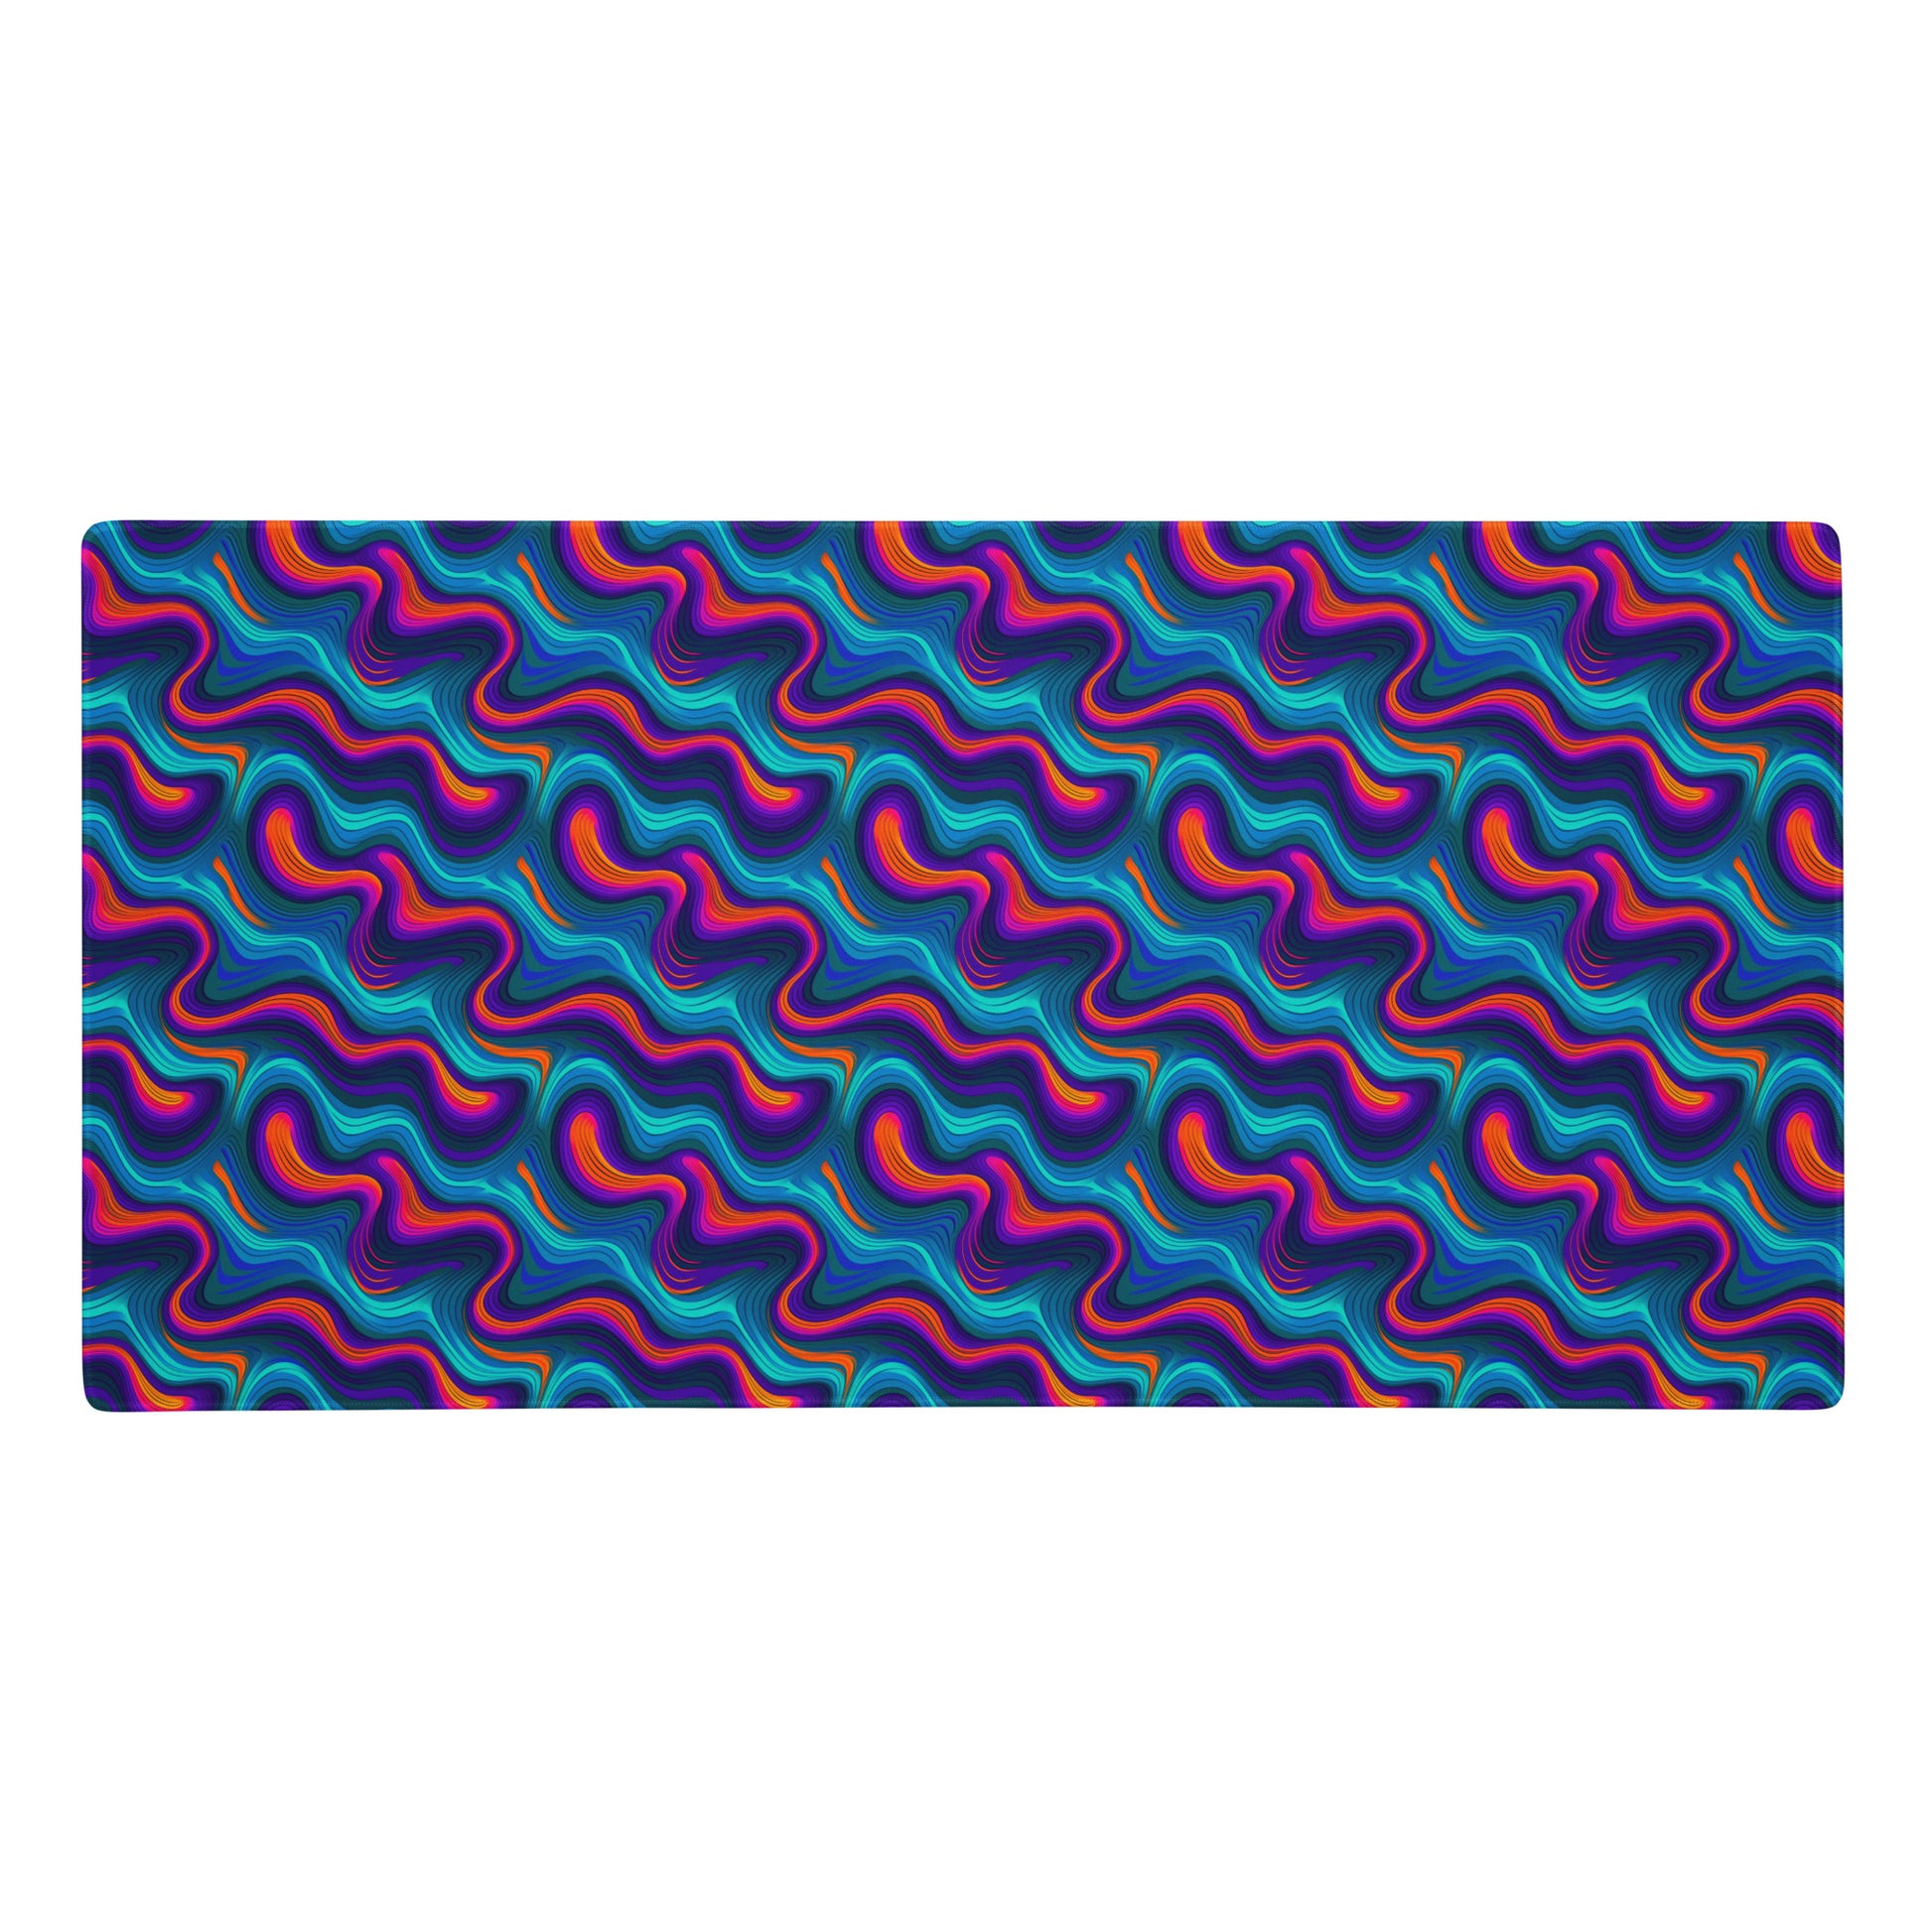 A 36" x 18" desk pad with blue and orange wavy pattern.